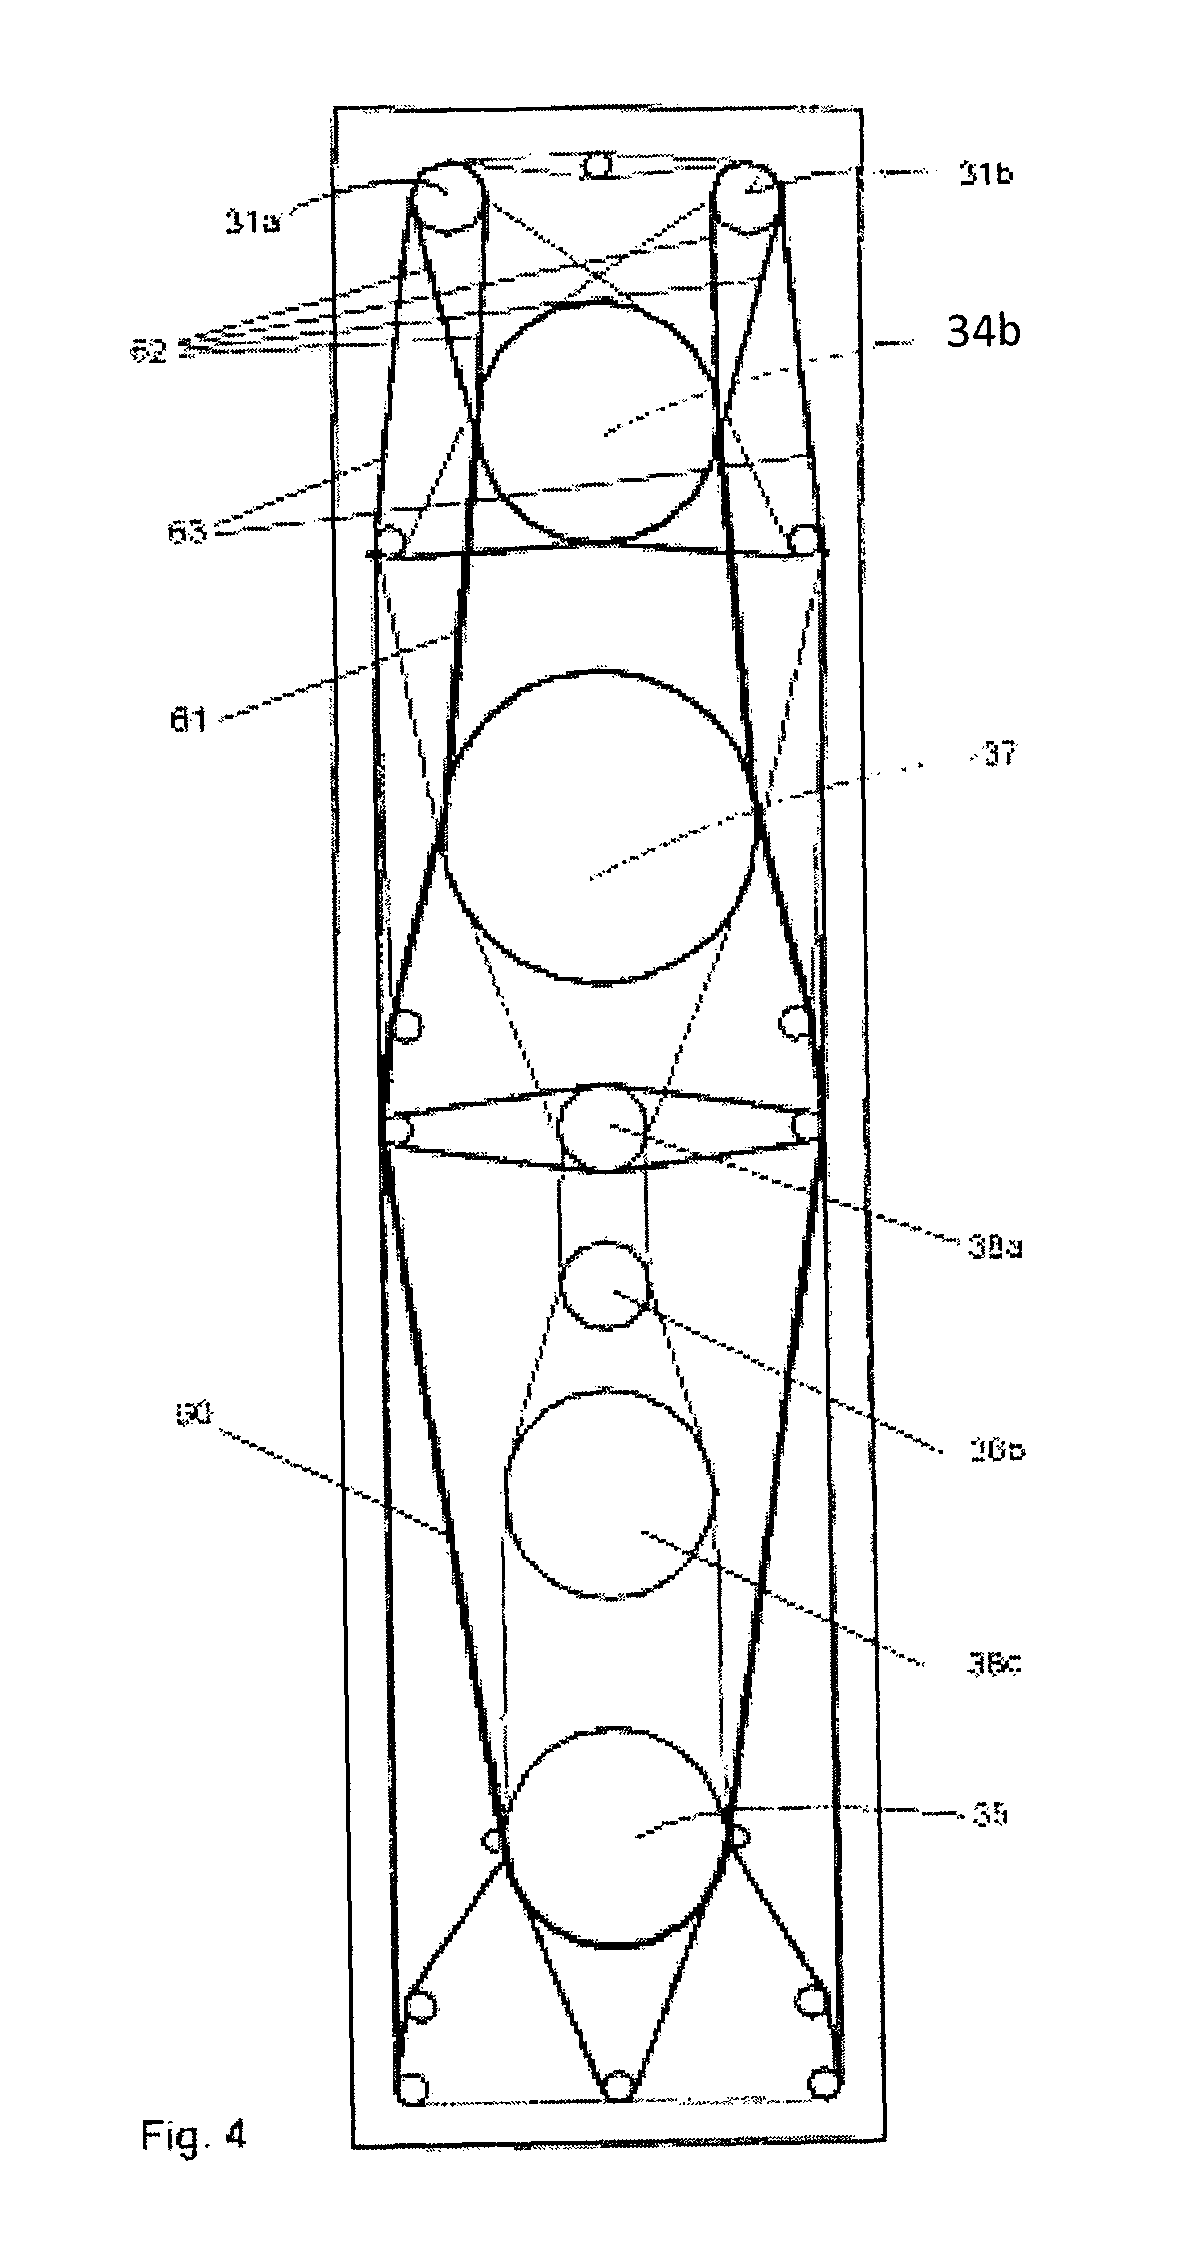 Steering unit for free flying, confined wing element